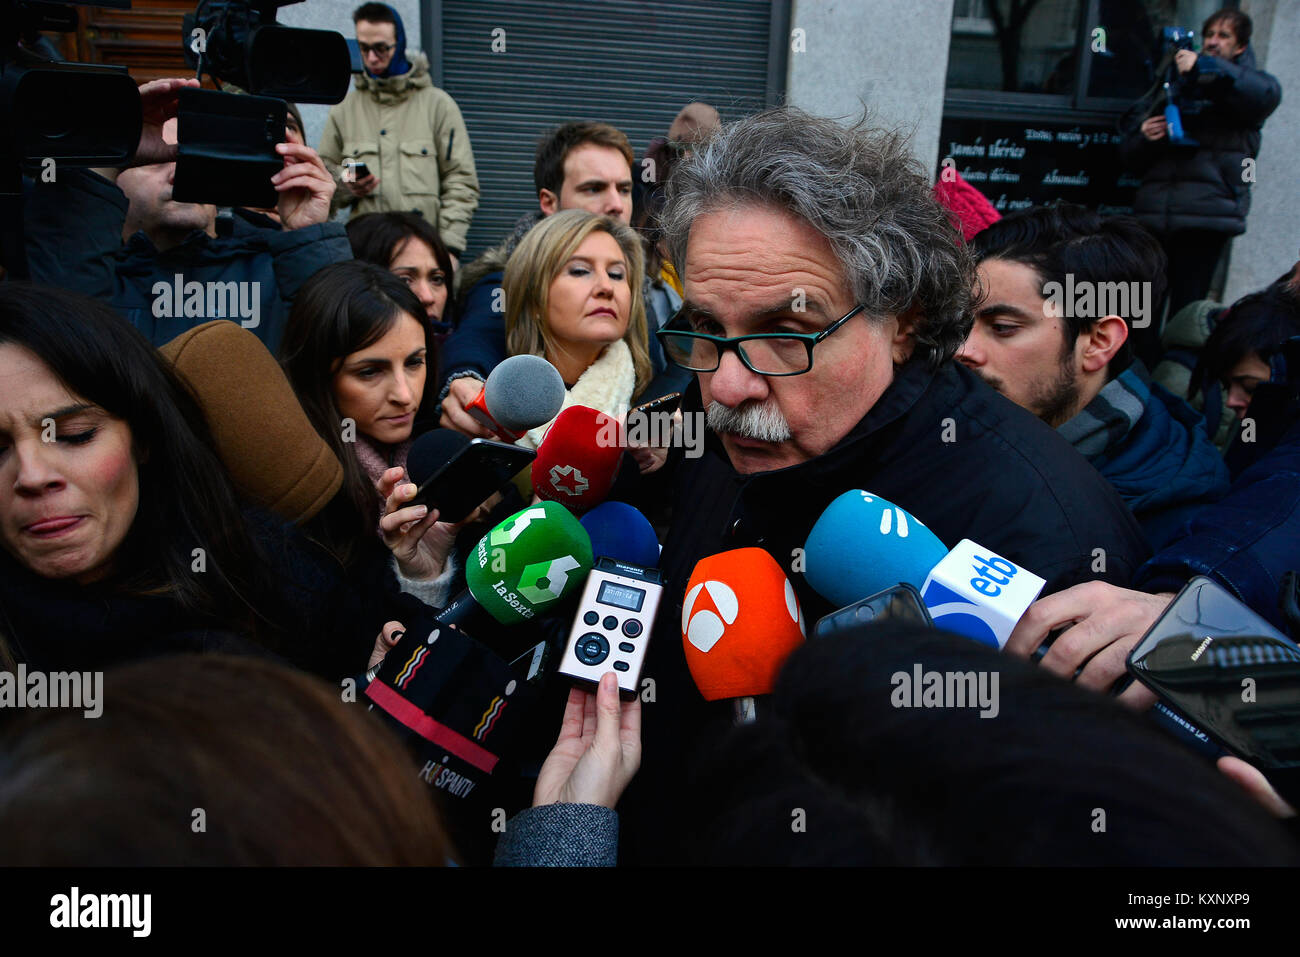 Madrid, Spain. 11th Jan, 2018. Joan Tarda from Esquerra Republicana de Catalunya (ERC) speaks to the press as pro-independence Catalan leaders Jordi Sanchez and Jordi Cuixart known as 'los Jordis', and Catalan Minister Joaquim Forn request release in Supreme Court in Madrid, Spain. Credit: Marcos del Mazo/Alamy Live News Stock Photo